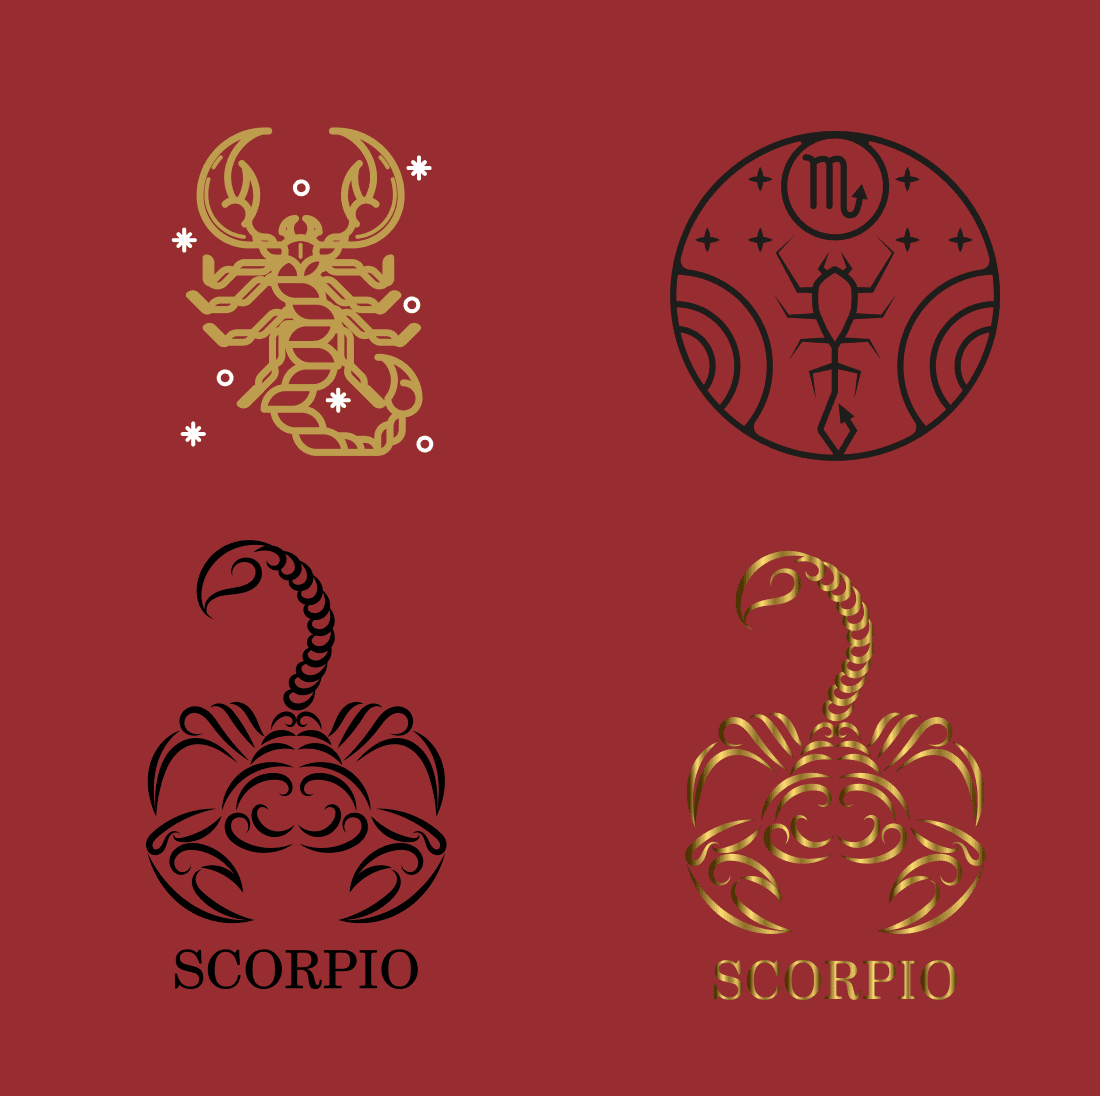 Four zodiac signs on a red background.